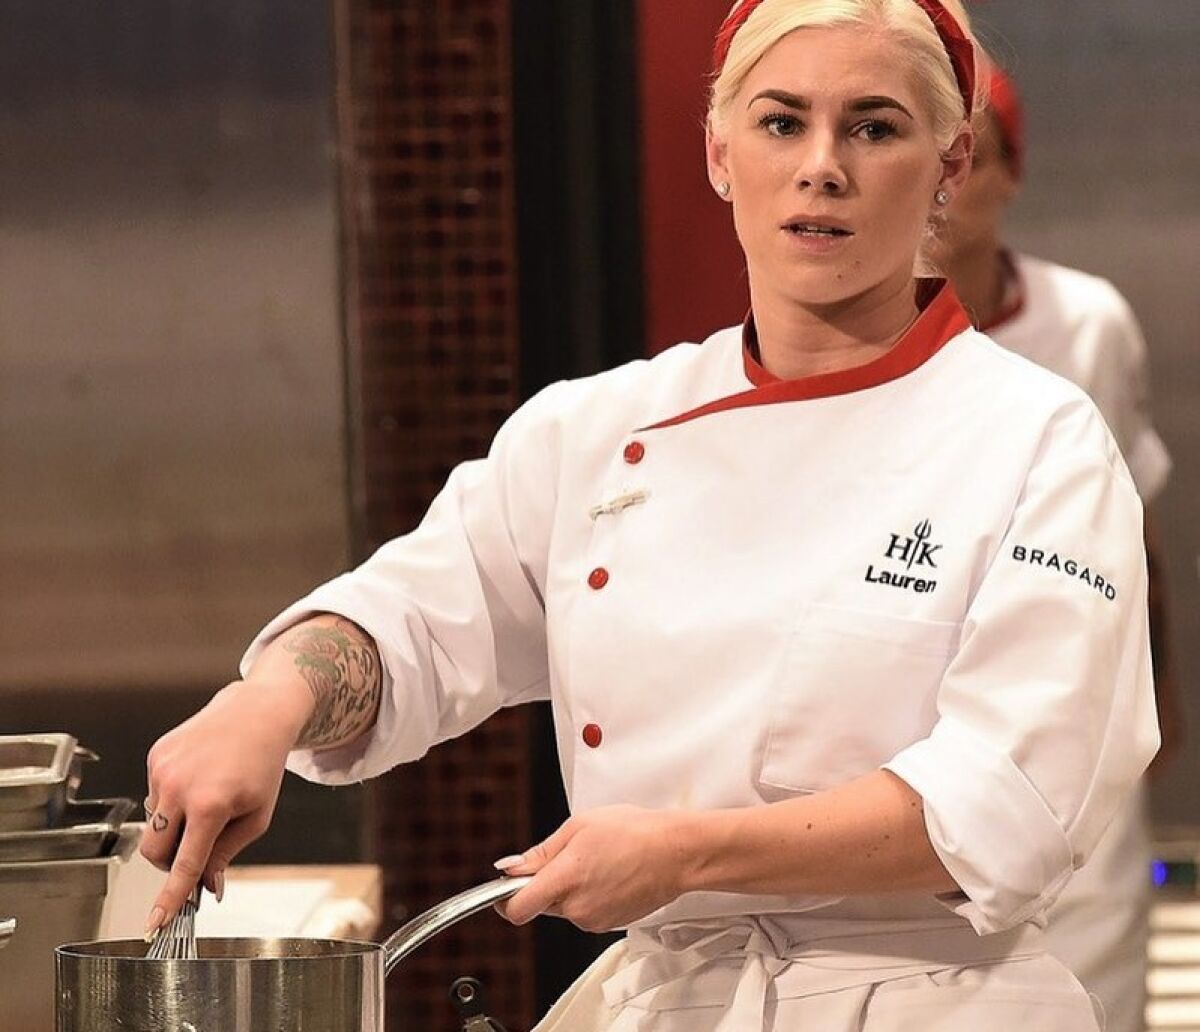 Lauren Lawless got to the top 10 on Gordan Ramsay's "Hell's Kitchen" this season. She re-appears in the April 15 episode.